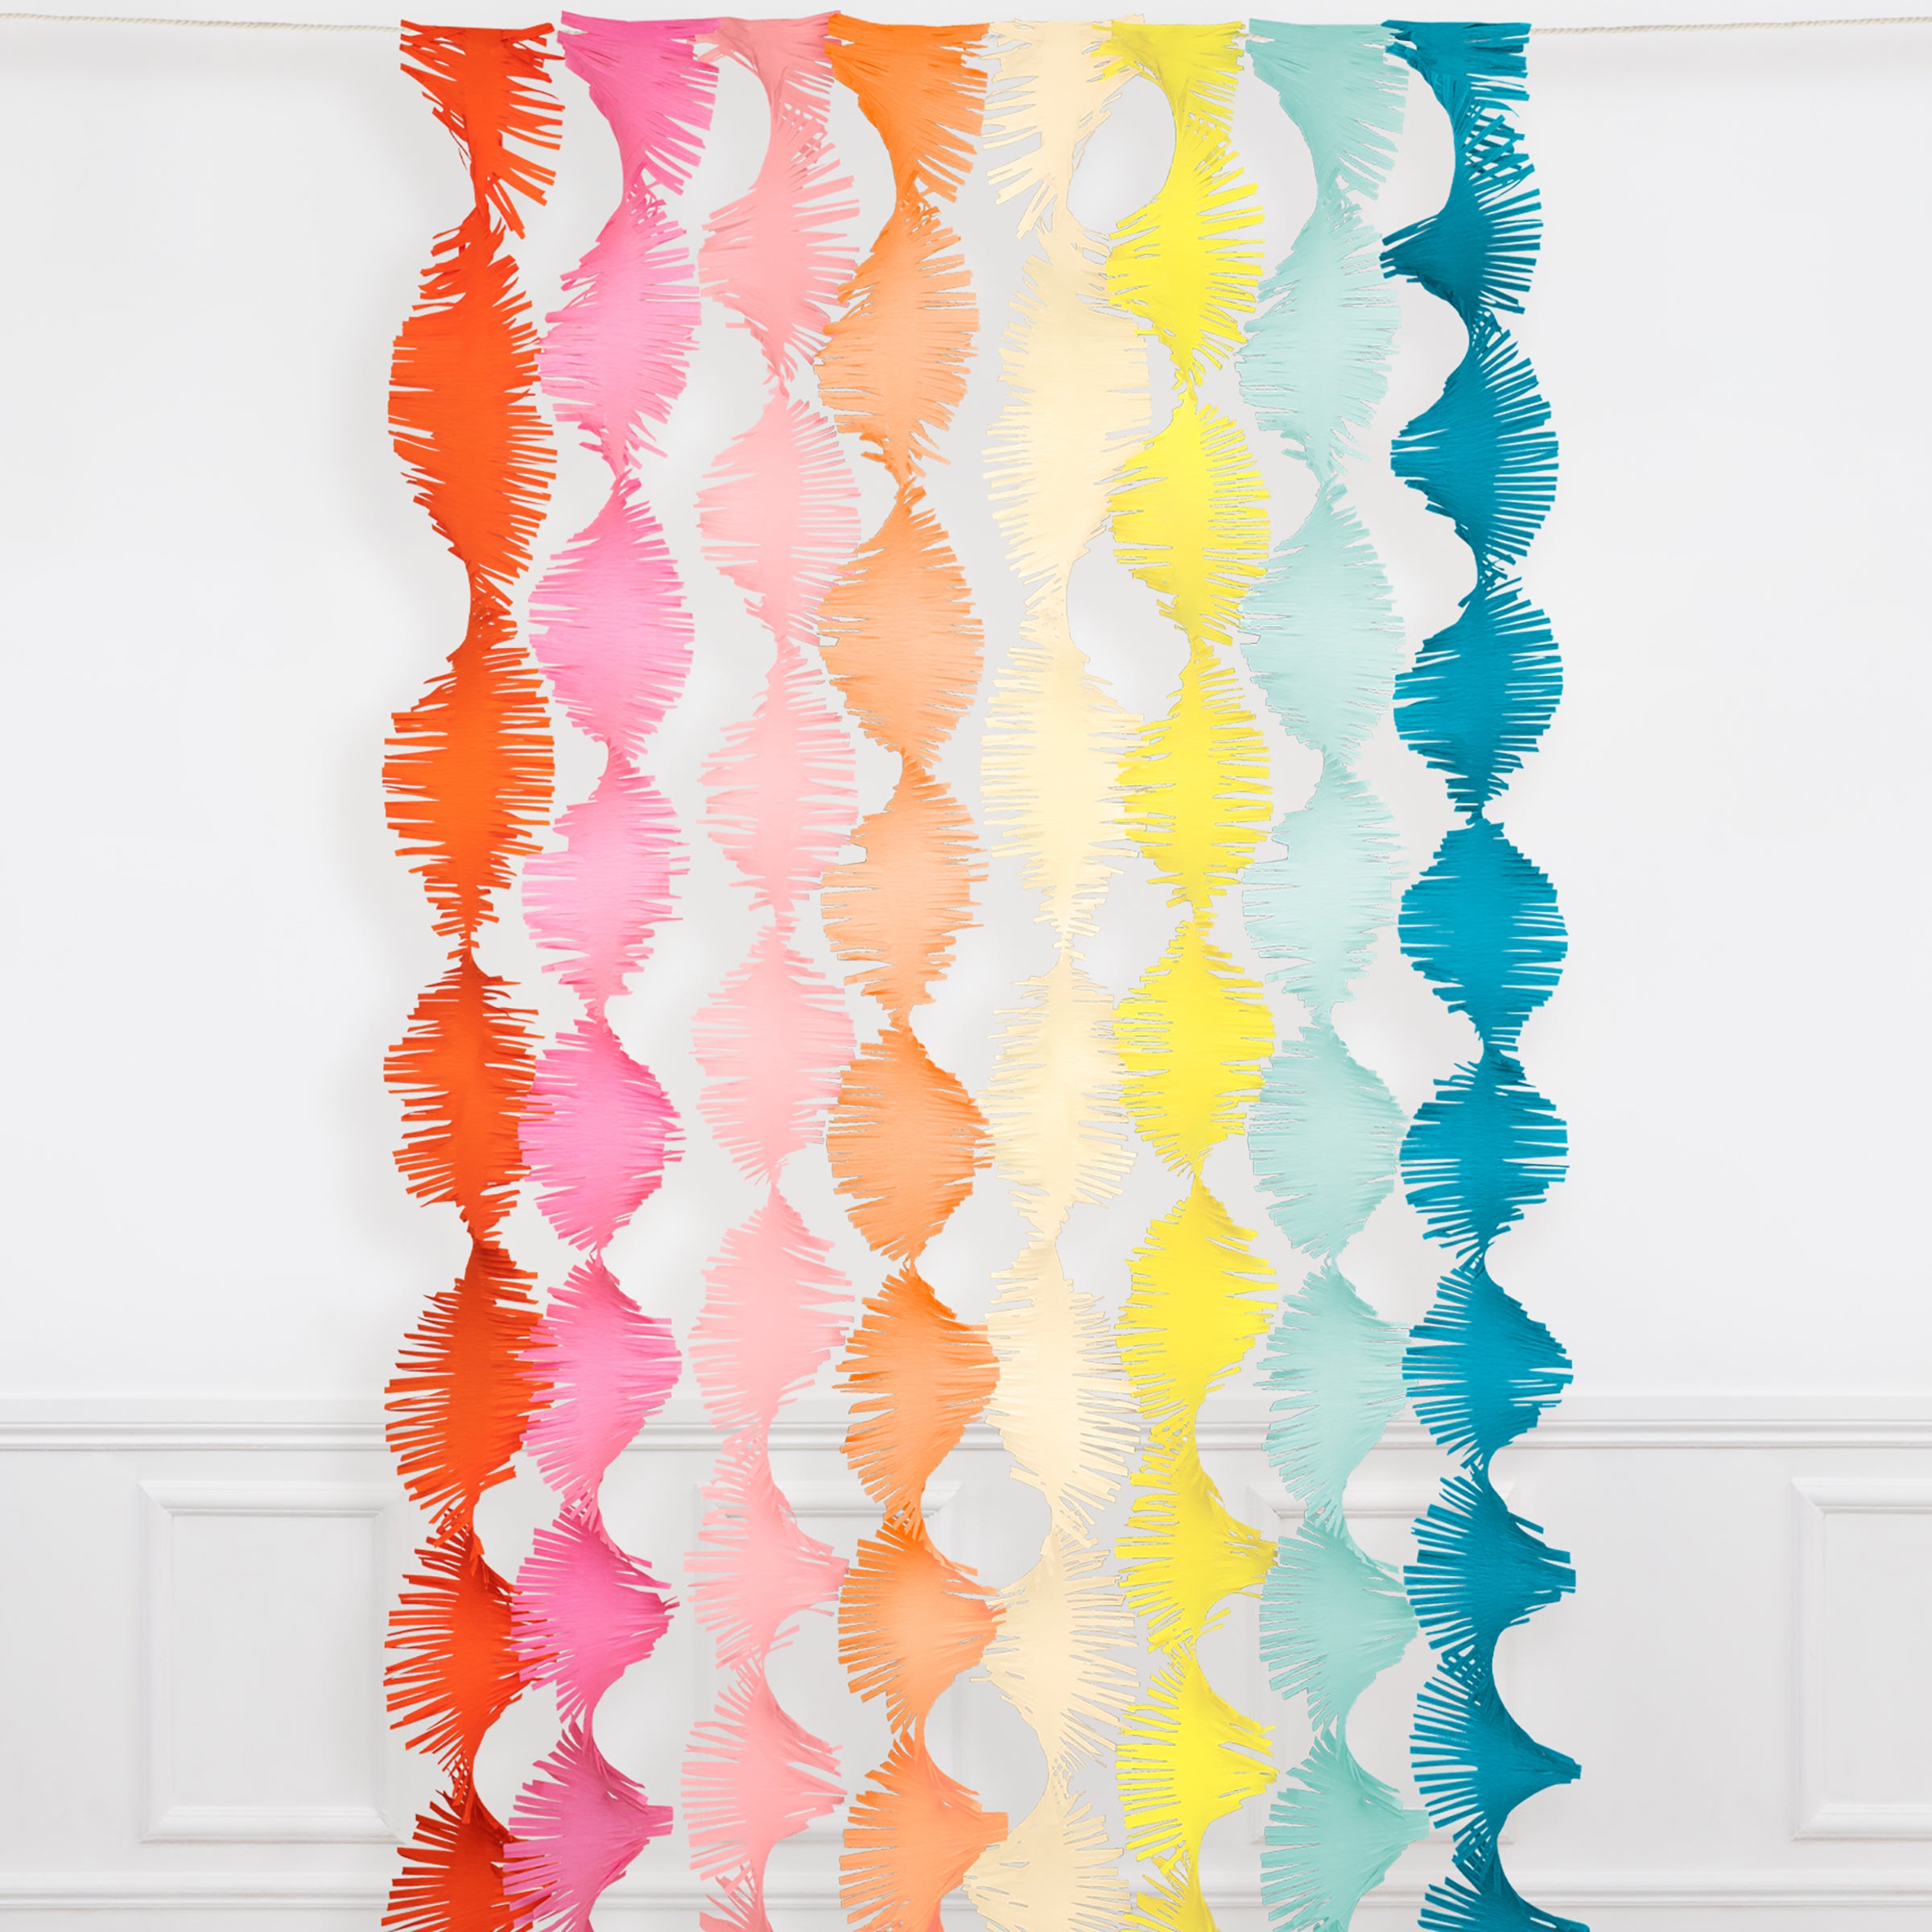 Our party backdrop is crafted from paper streamers in 8 colors.